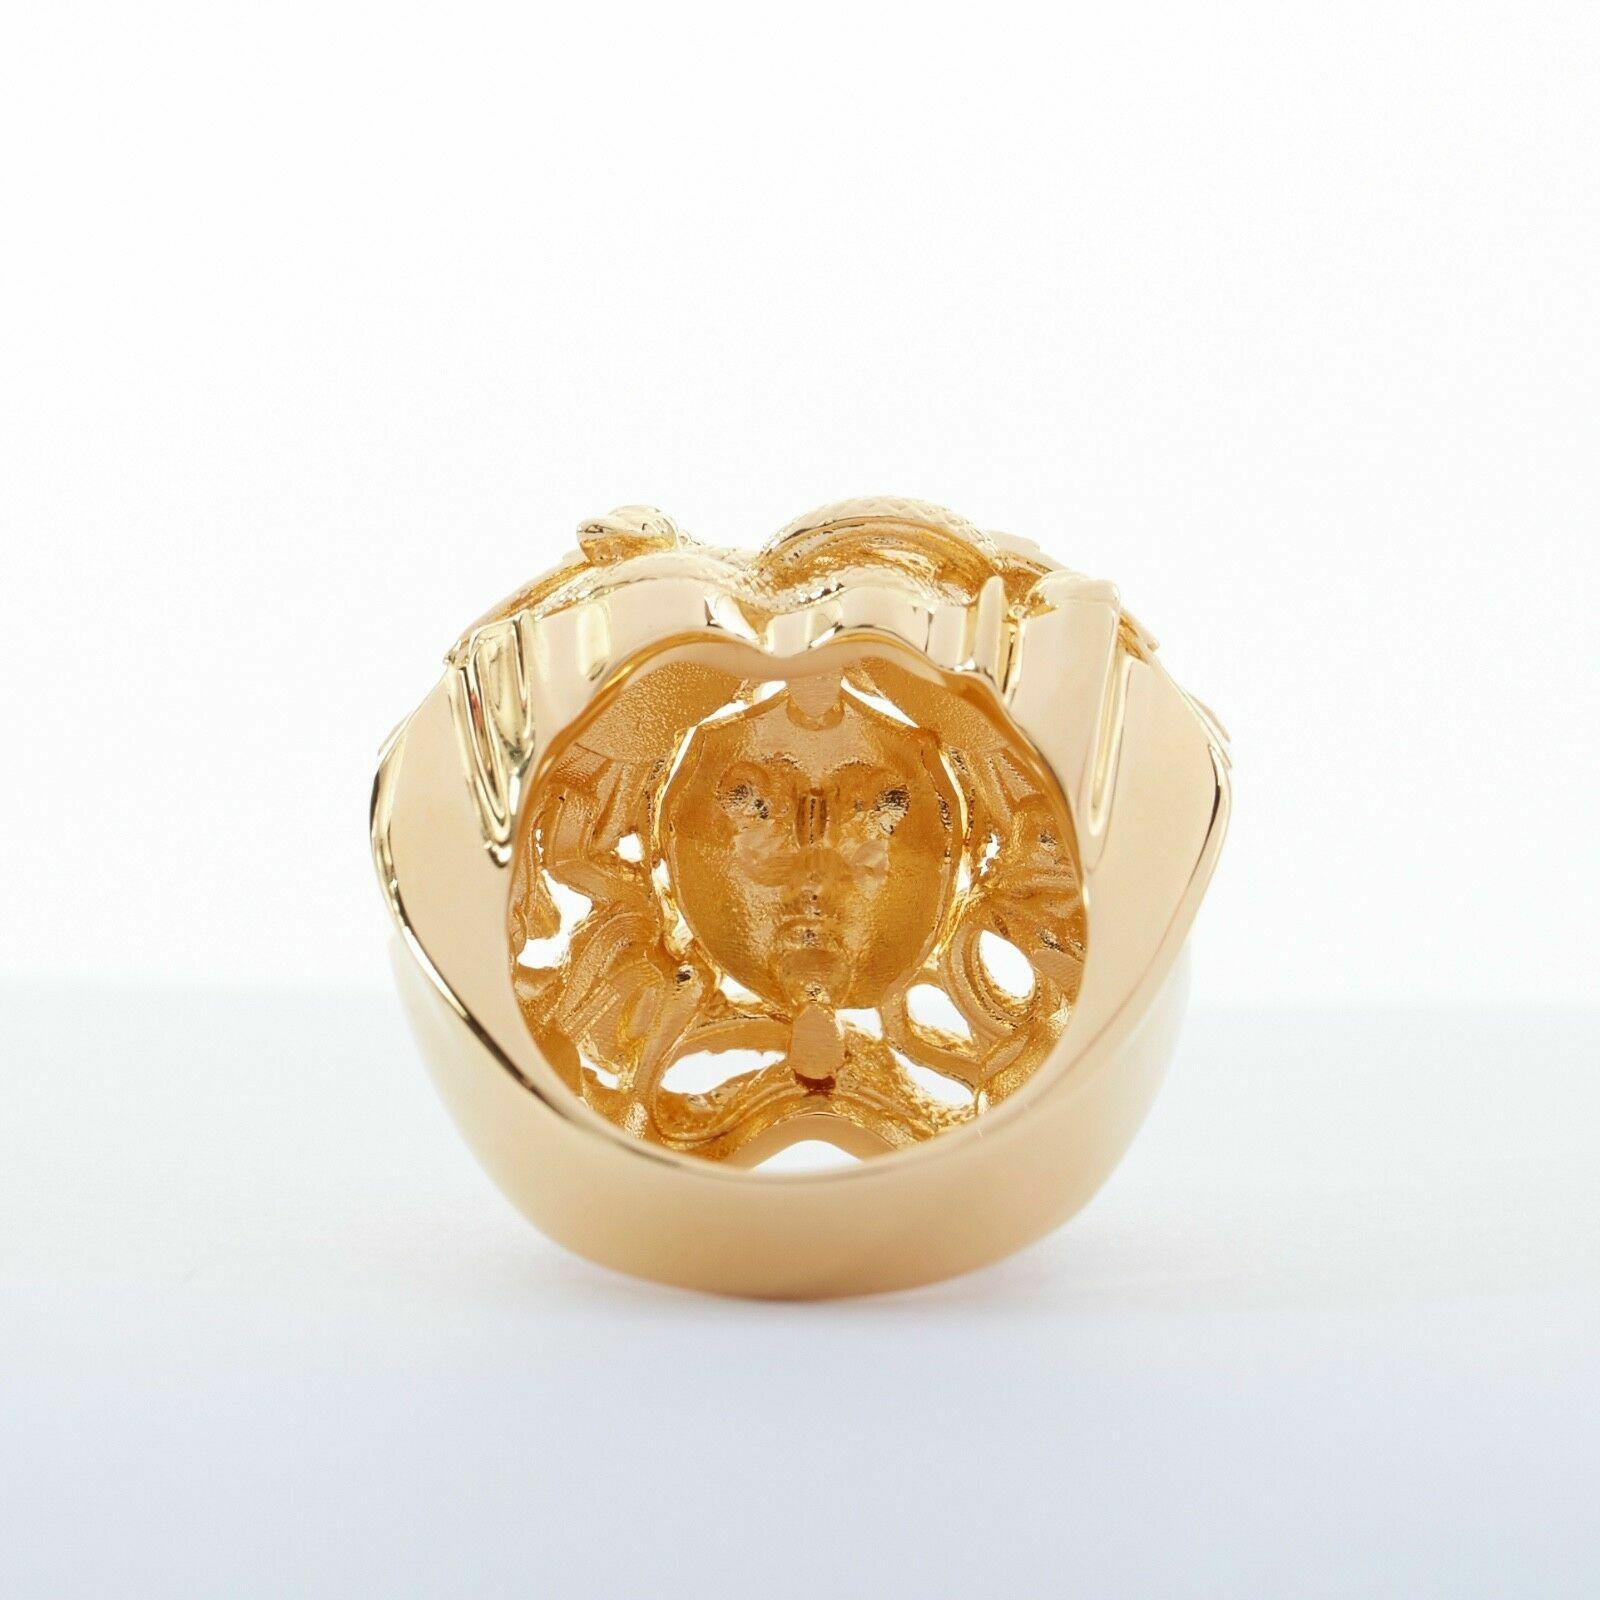 Women's new VERSACE Palazzo Medusa snake head gold plated large cocktail ring 8.75